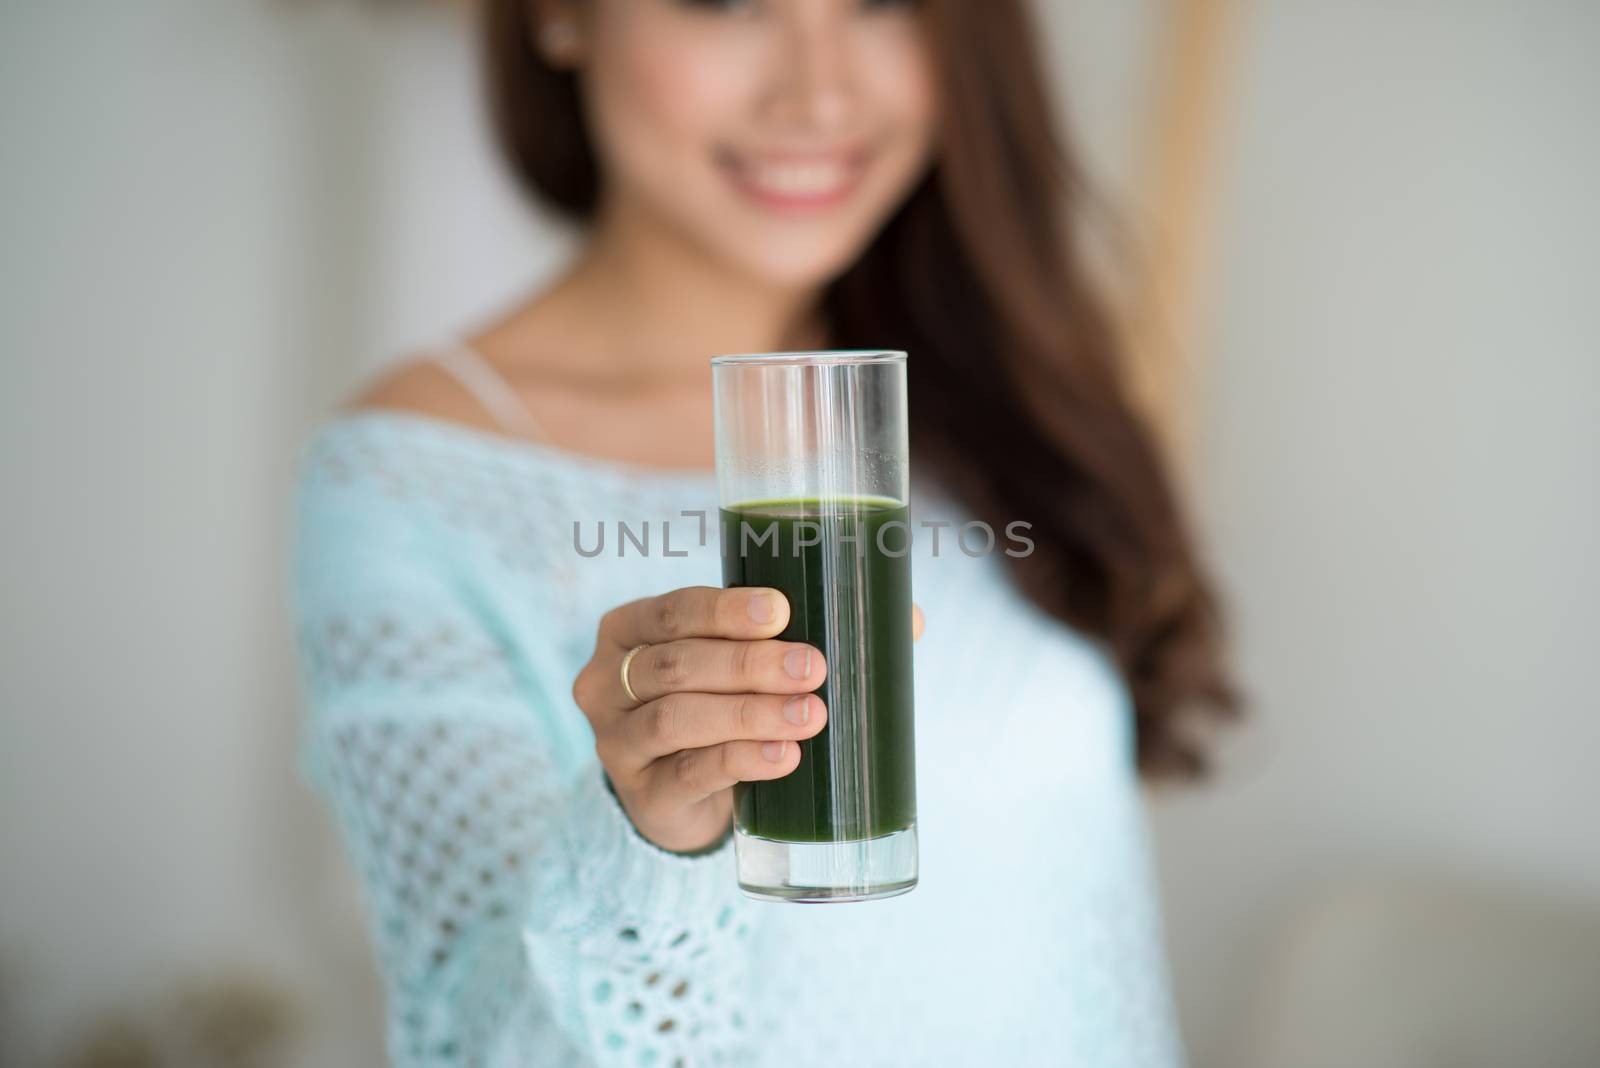 Pretty young asian woman drinking green fresh vegetable juice or smoothie from glass at home